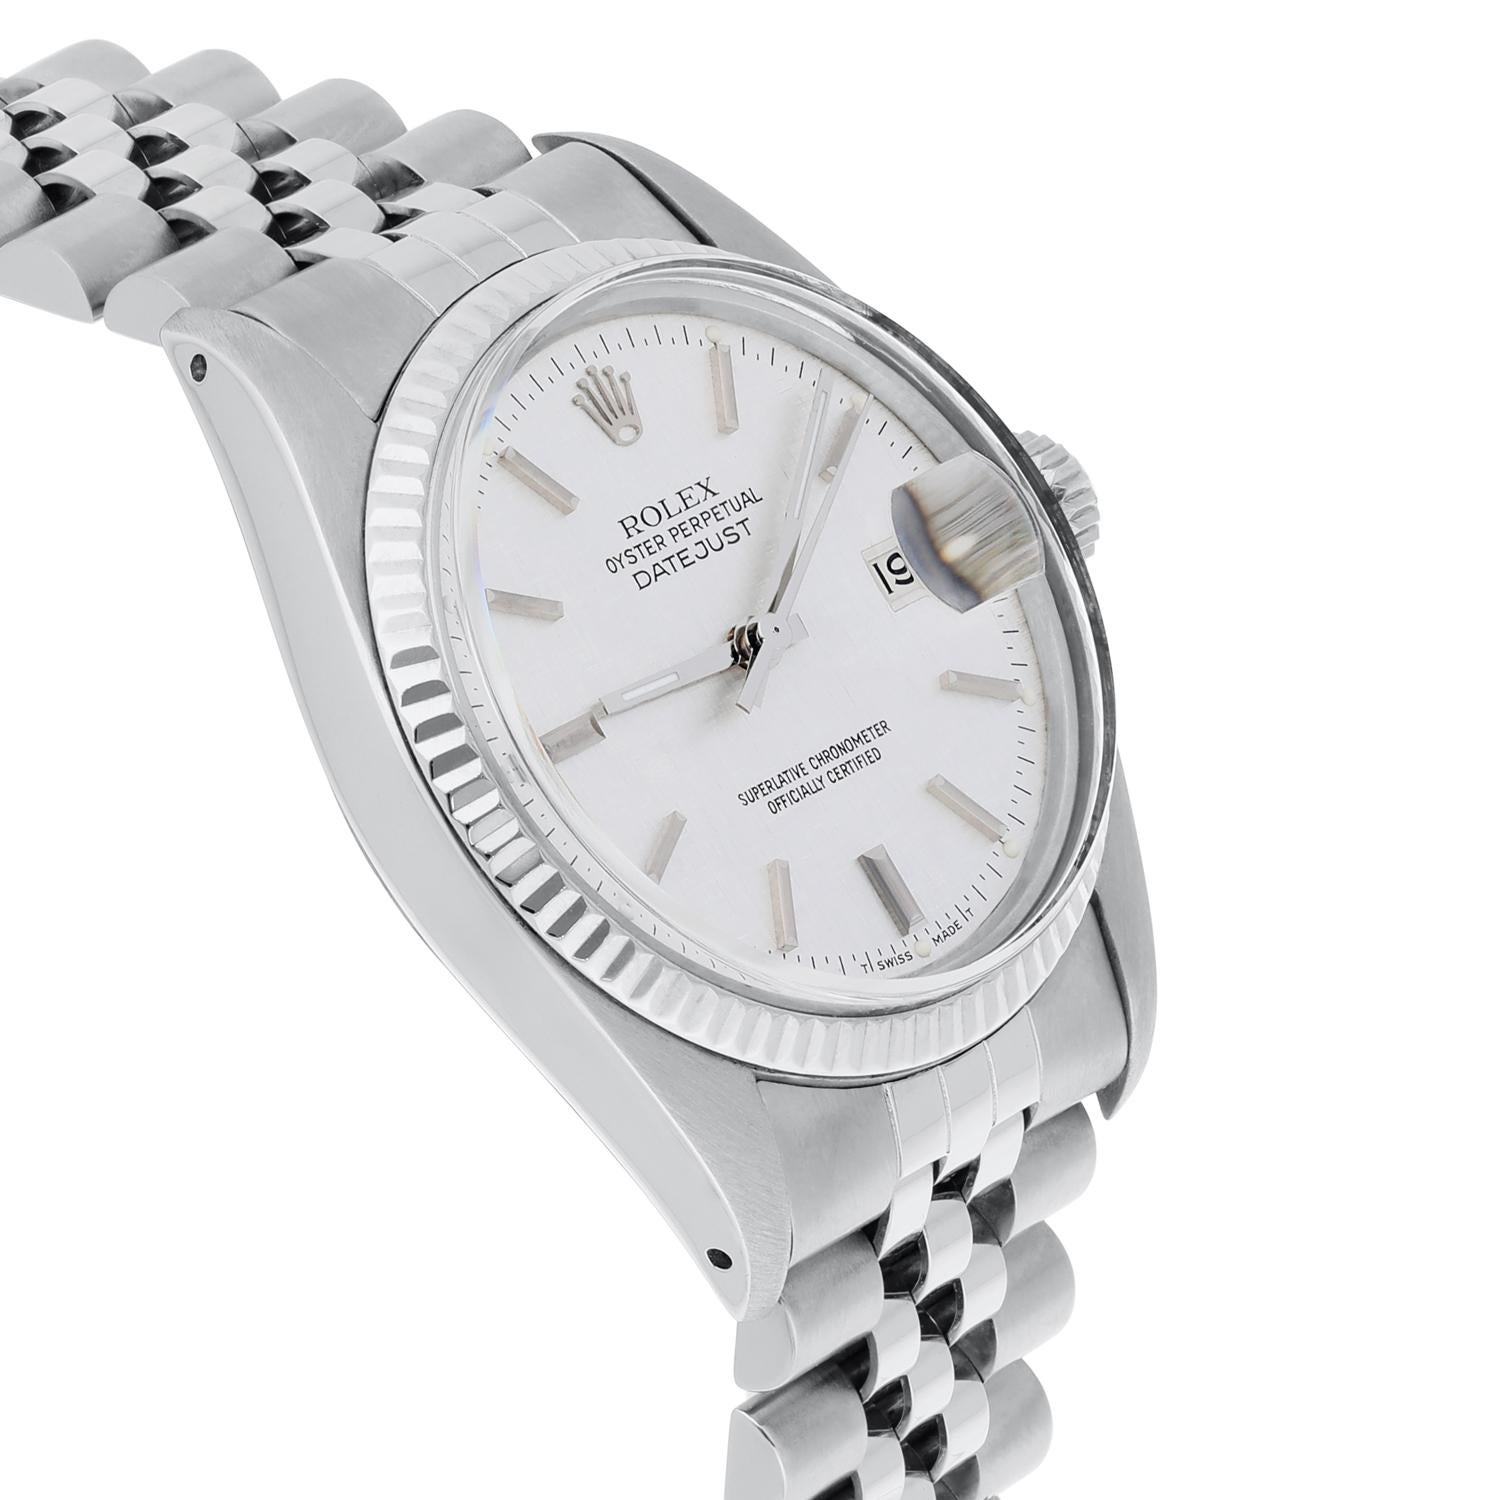 Rolex Datejust 36mm Stainless Steel 16014 Silver Linen Dial, Jubilee Circa 1979 For Sale 1